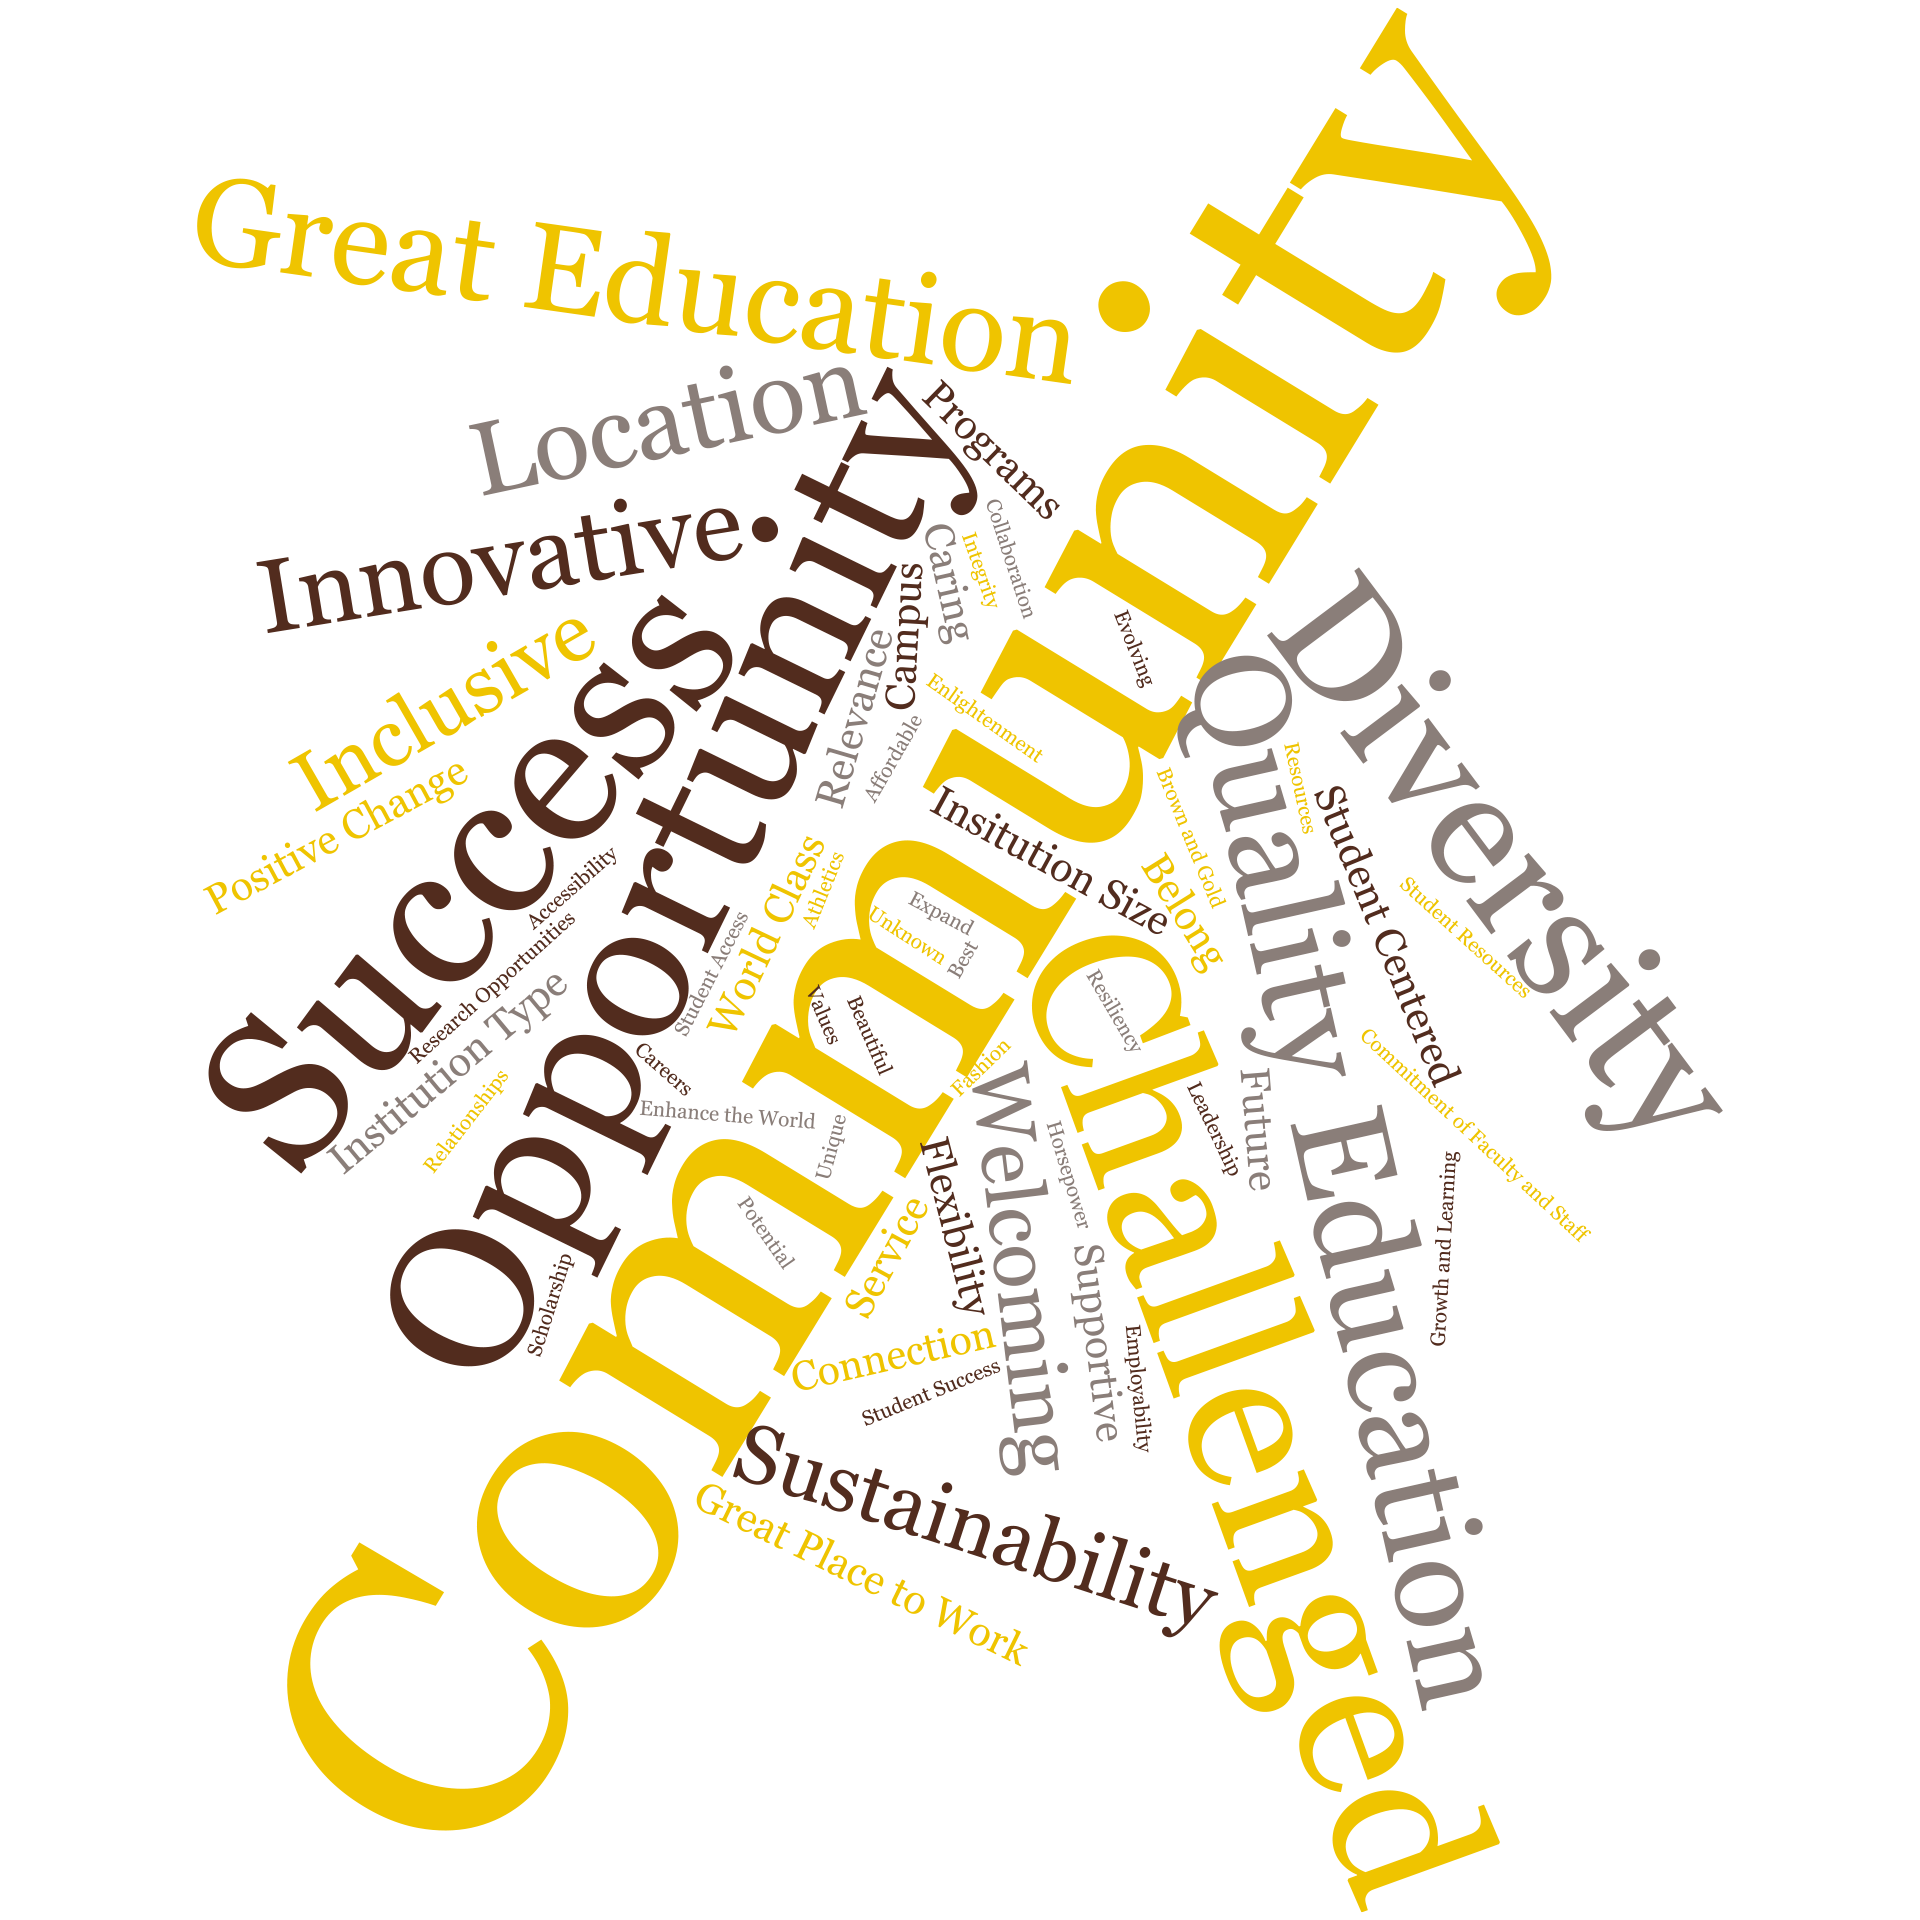 A visual of a cluster of words for the question "Why WMU" defined categories include community, education, quality, opportunity, success, challenged, diversity, great